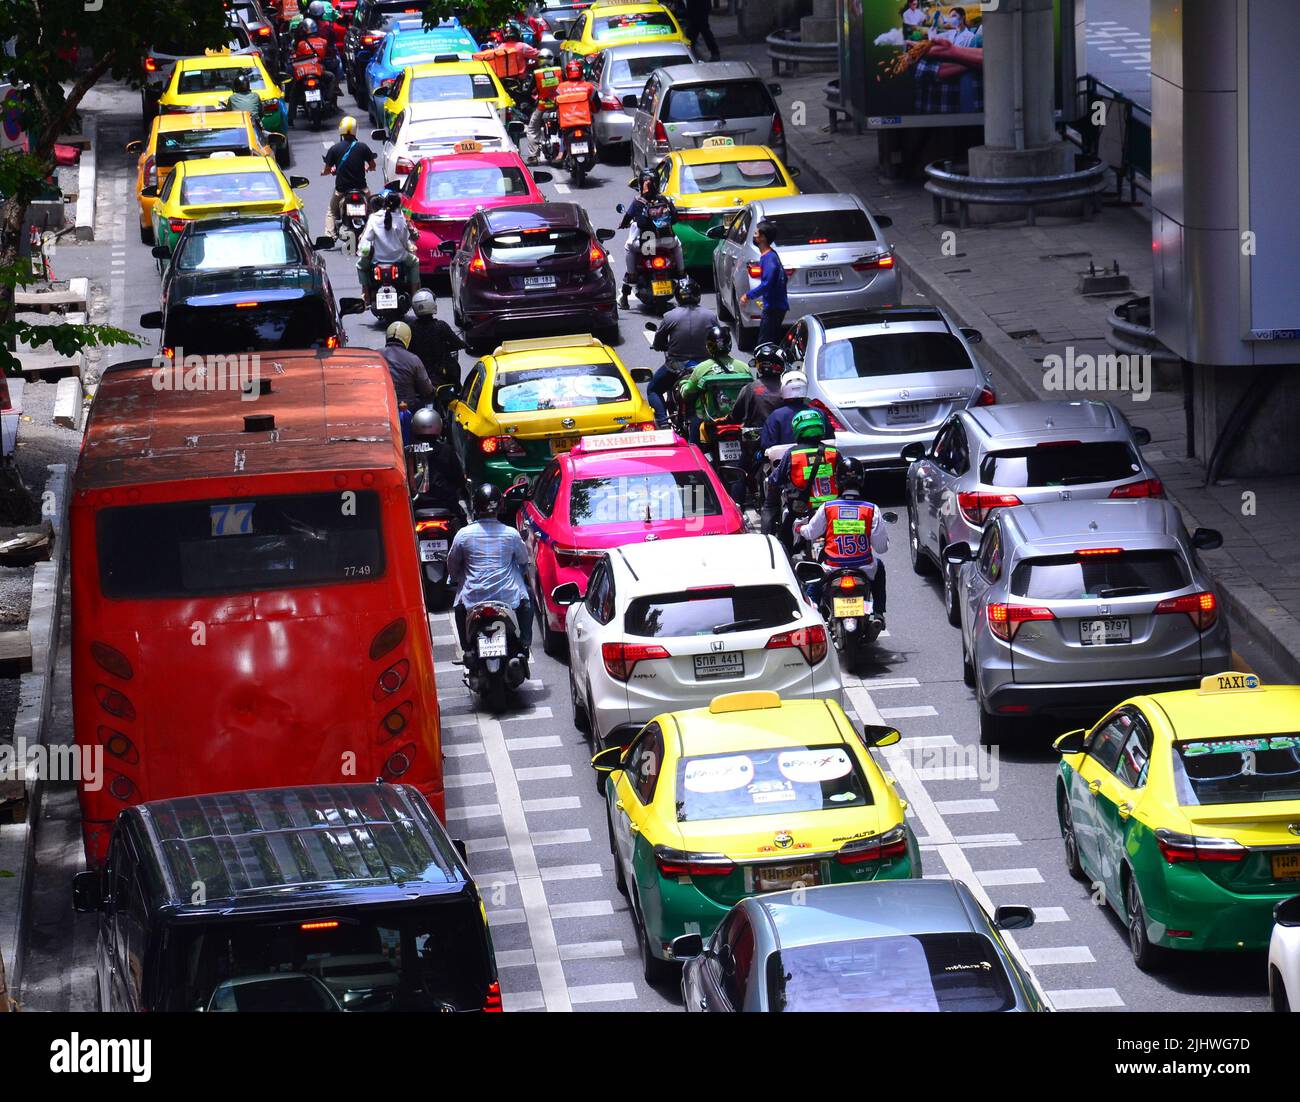 Traffic jam of cars, motorbikes and a bus on Silom Road, Bangkok, Thailand, Asia, as drivers of vehicles struggle to make progress in daytime busy traffic. Stock Photo